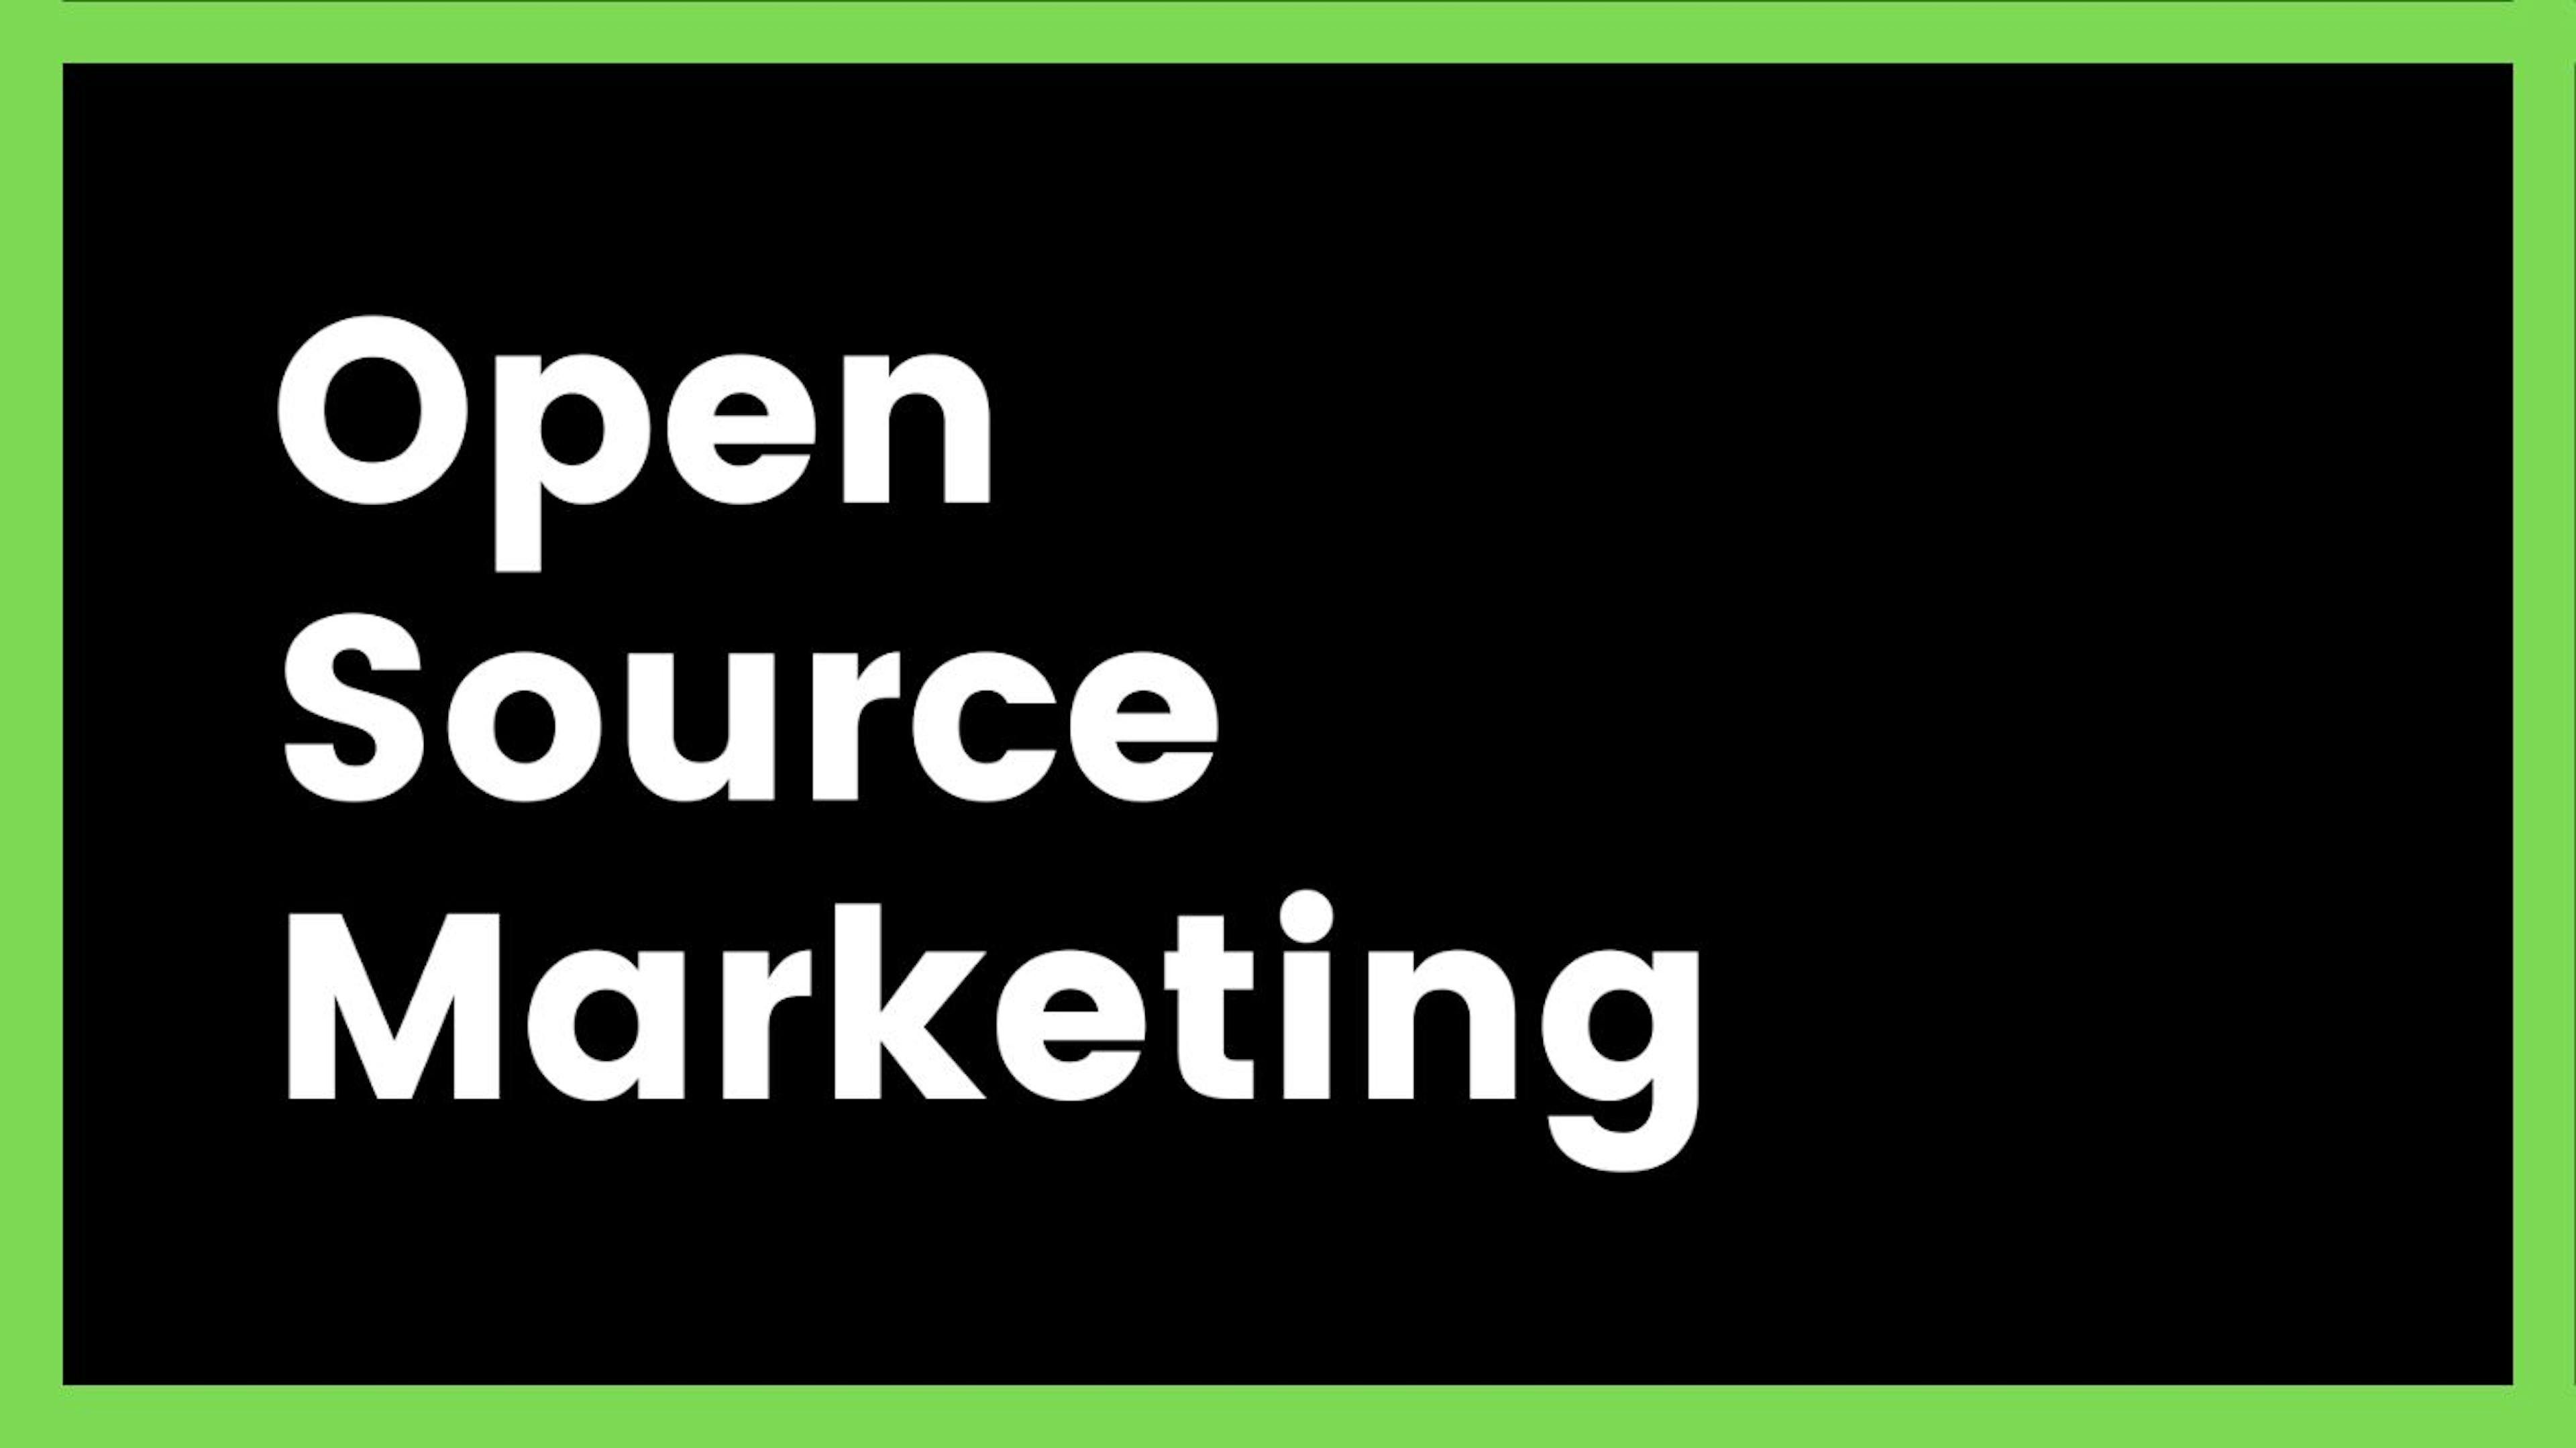 featured image - Open Source Founders' Advice on Marketing that You Should not Ignore 